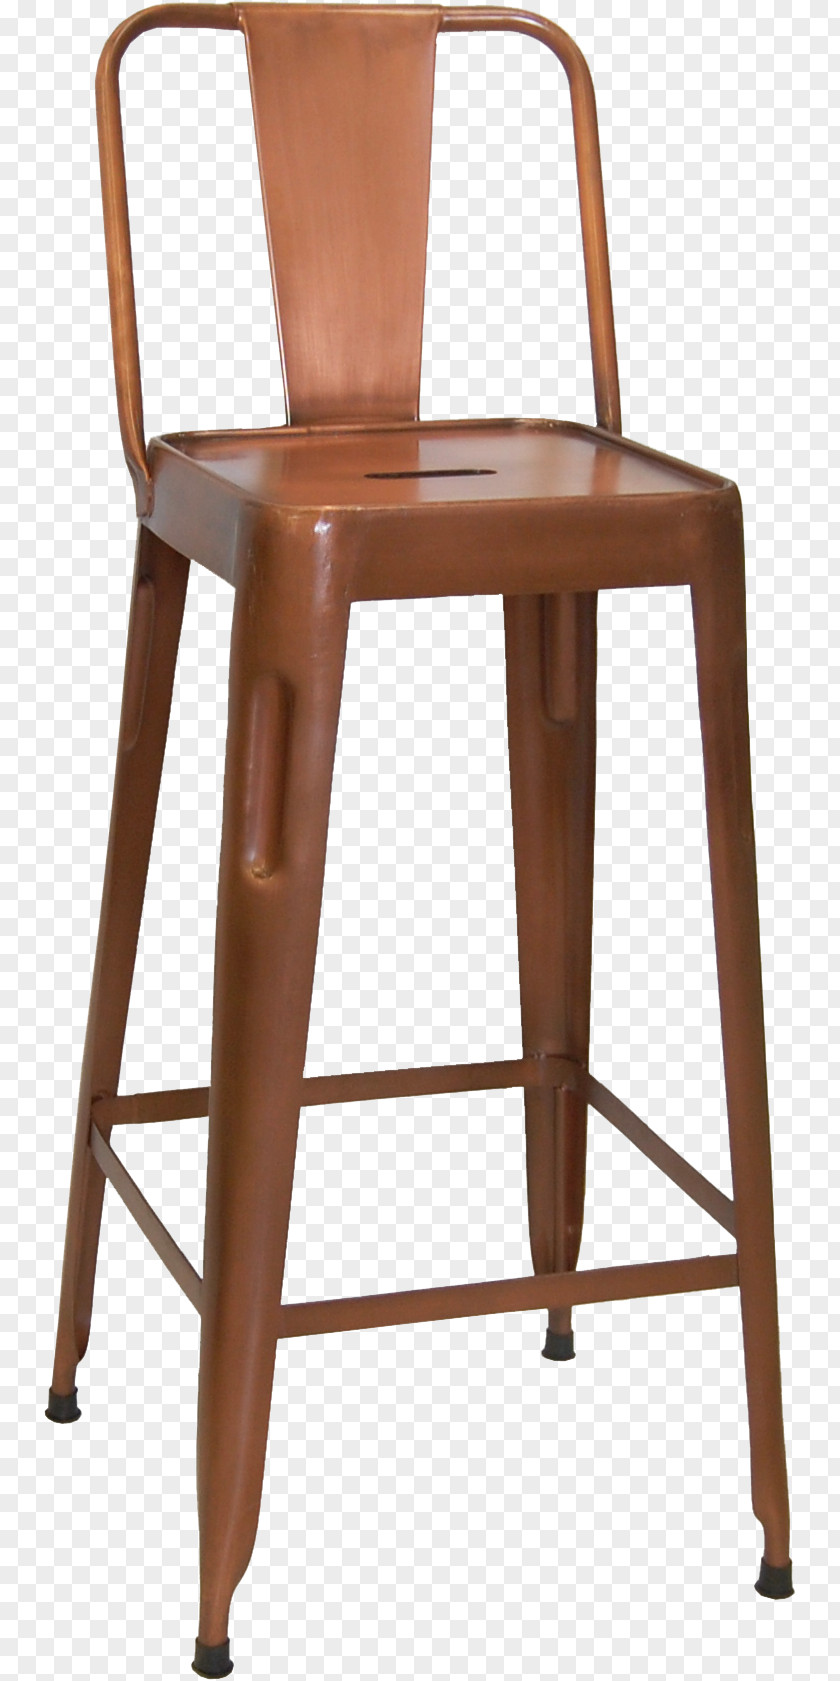 Table Bar Stool Chair Seat PNG